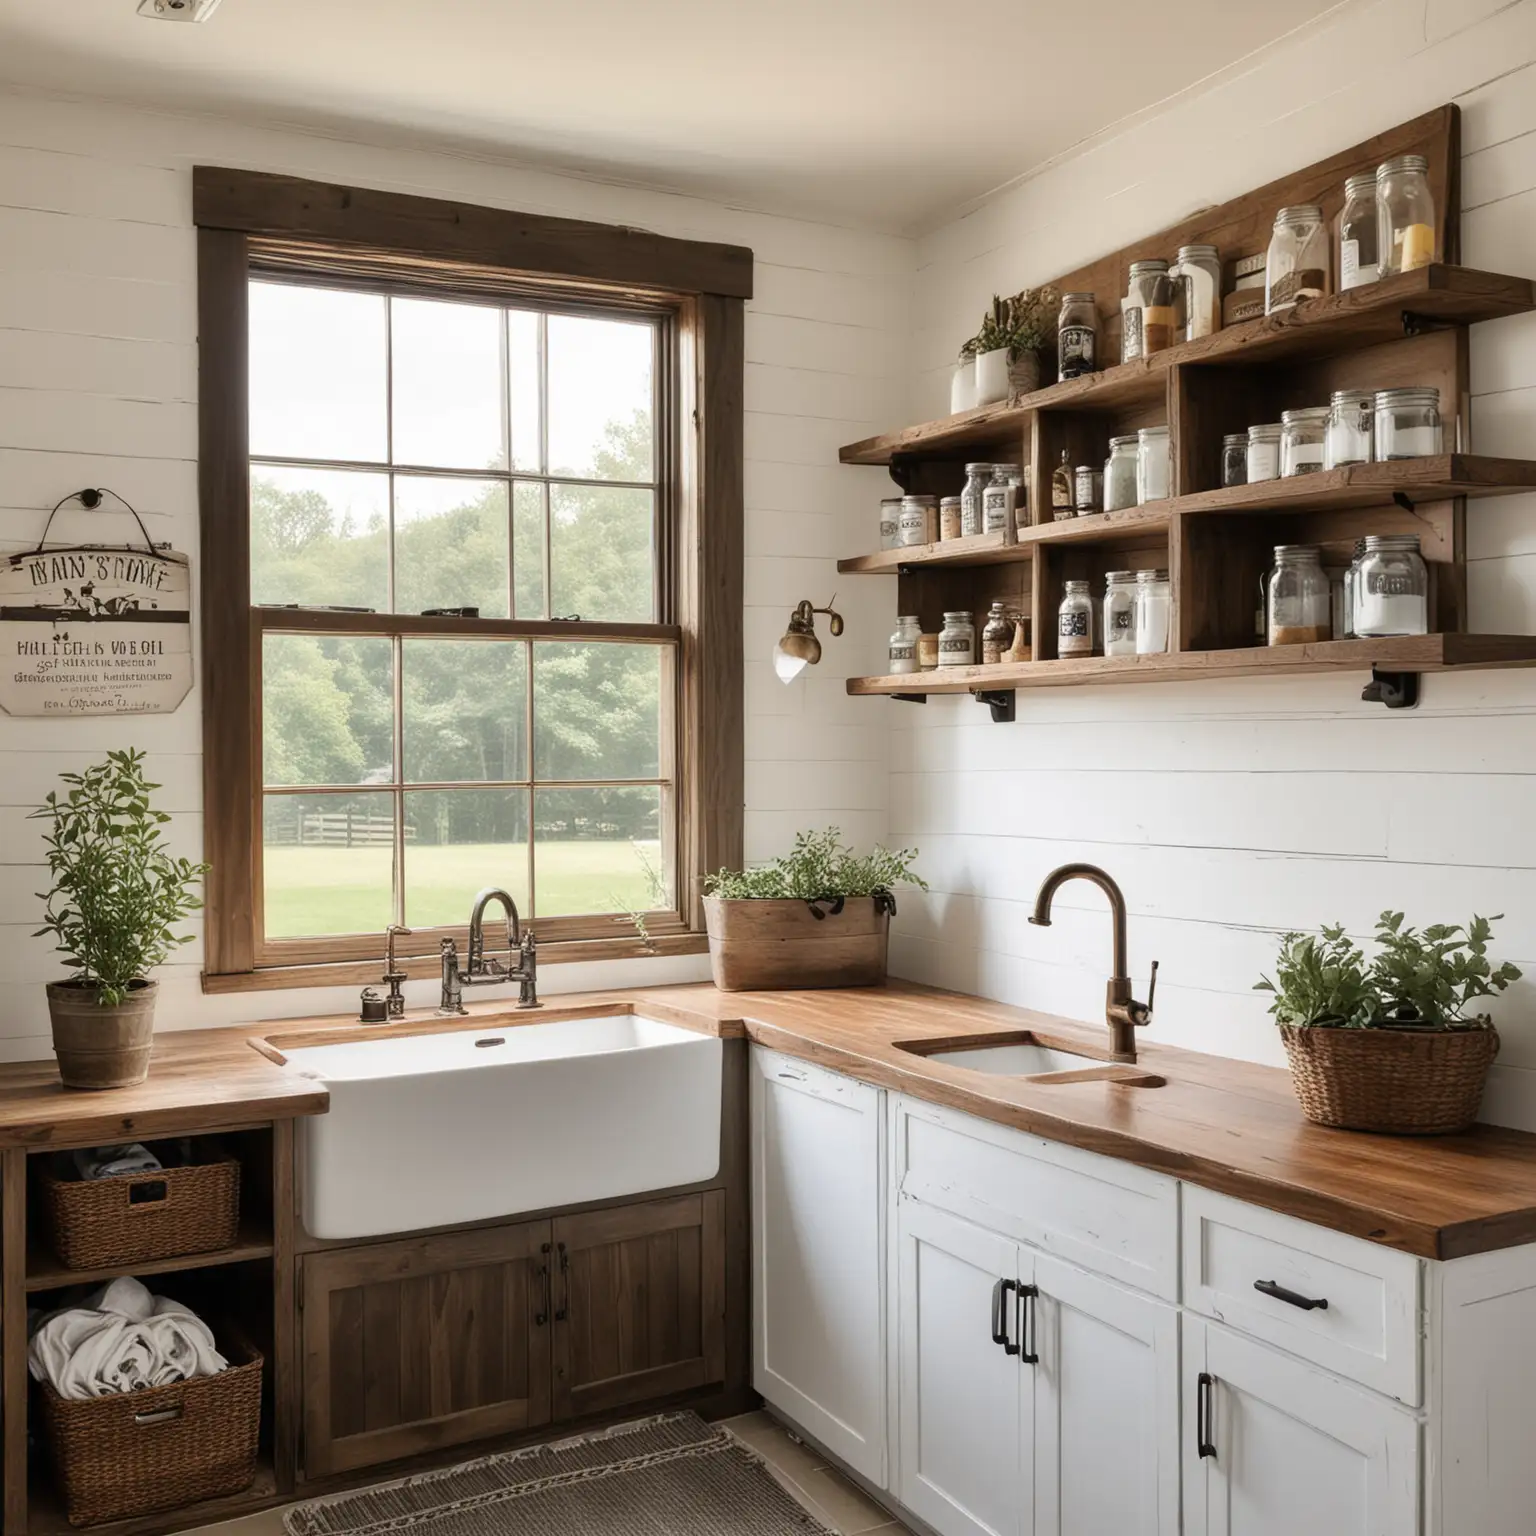 A modern farmhouse-style laundry room featuring white shiplap walls, dark wood cabinets, and a farmhouse sink with a brass faucet. There are open shelves with mason jars filled with laundry supplies, and the room is decorated with rustic signs. A large window overlooks the barnyard, and there is a cozy bench with storage underneath.